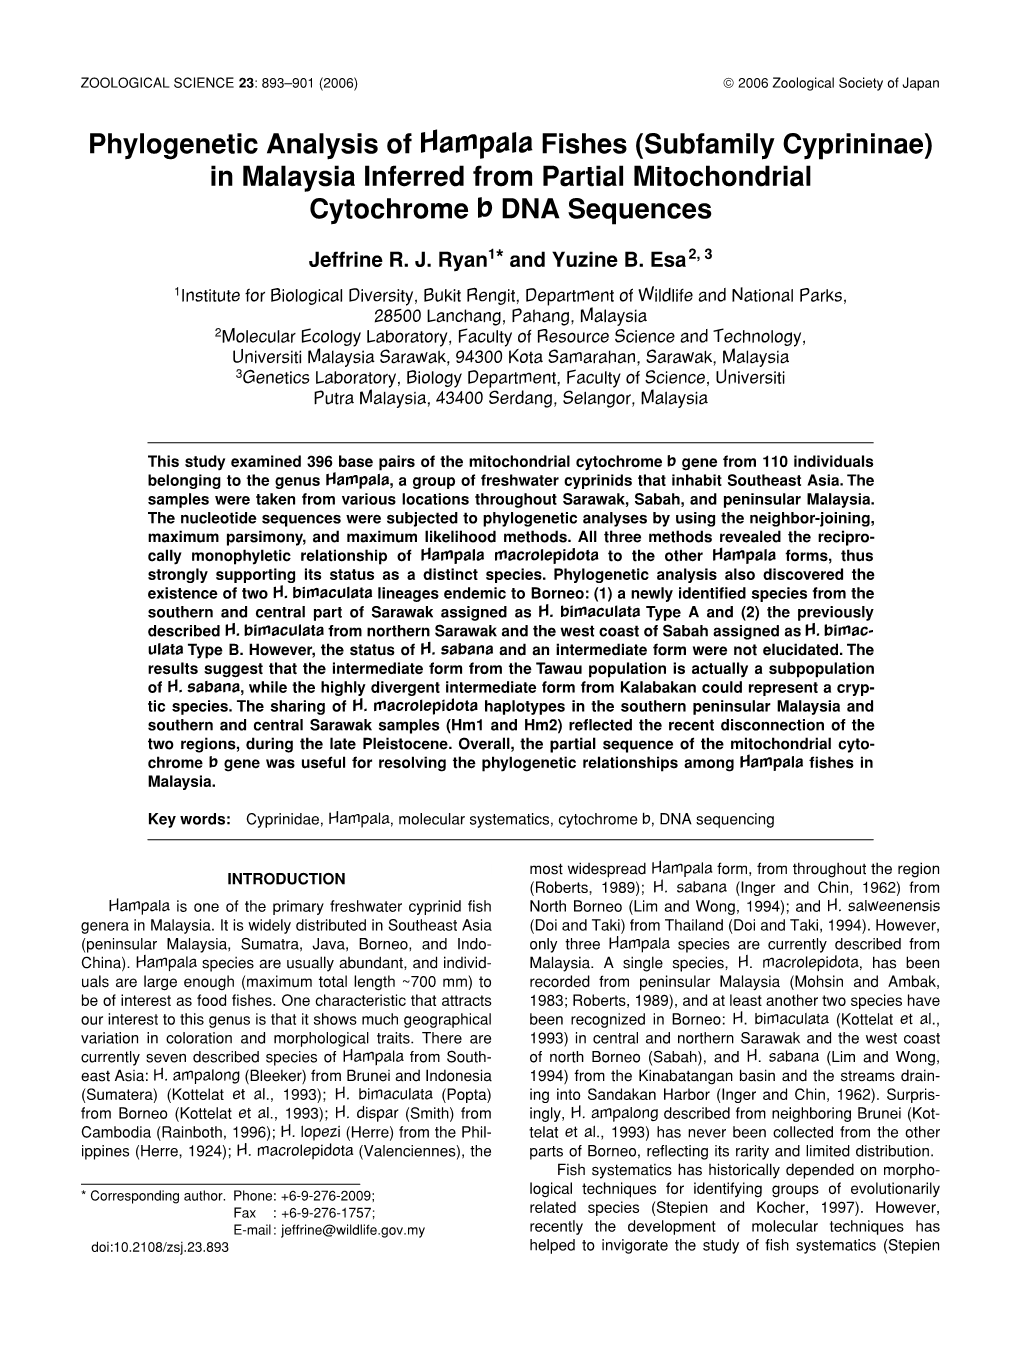 Phylogenetic Analysis of Hampala Fishes (Subfamily Cyprininae) in Malaysia Inferred from Partial Mitochondrial Cytochrome B DNA Sequences